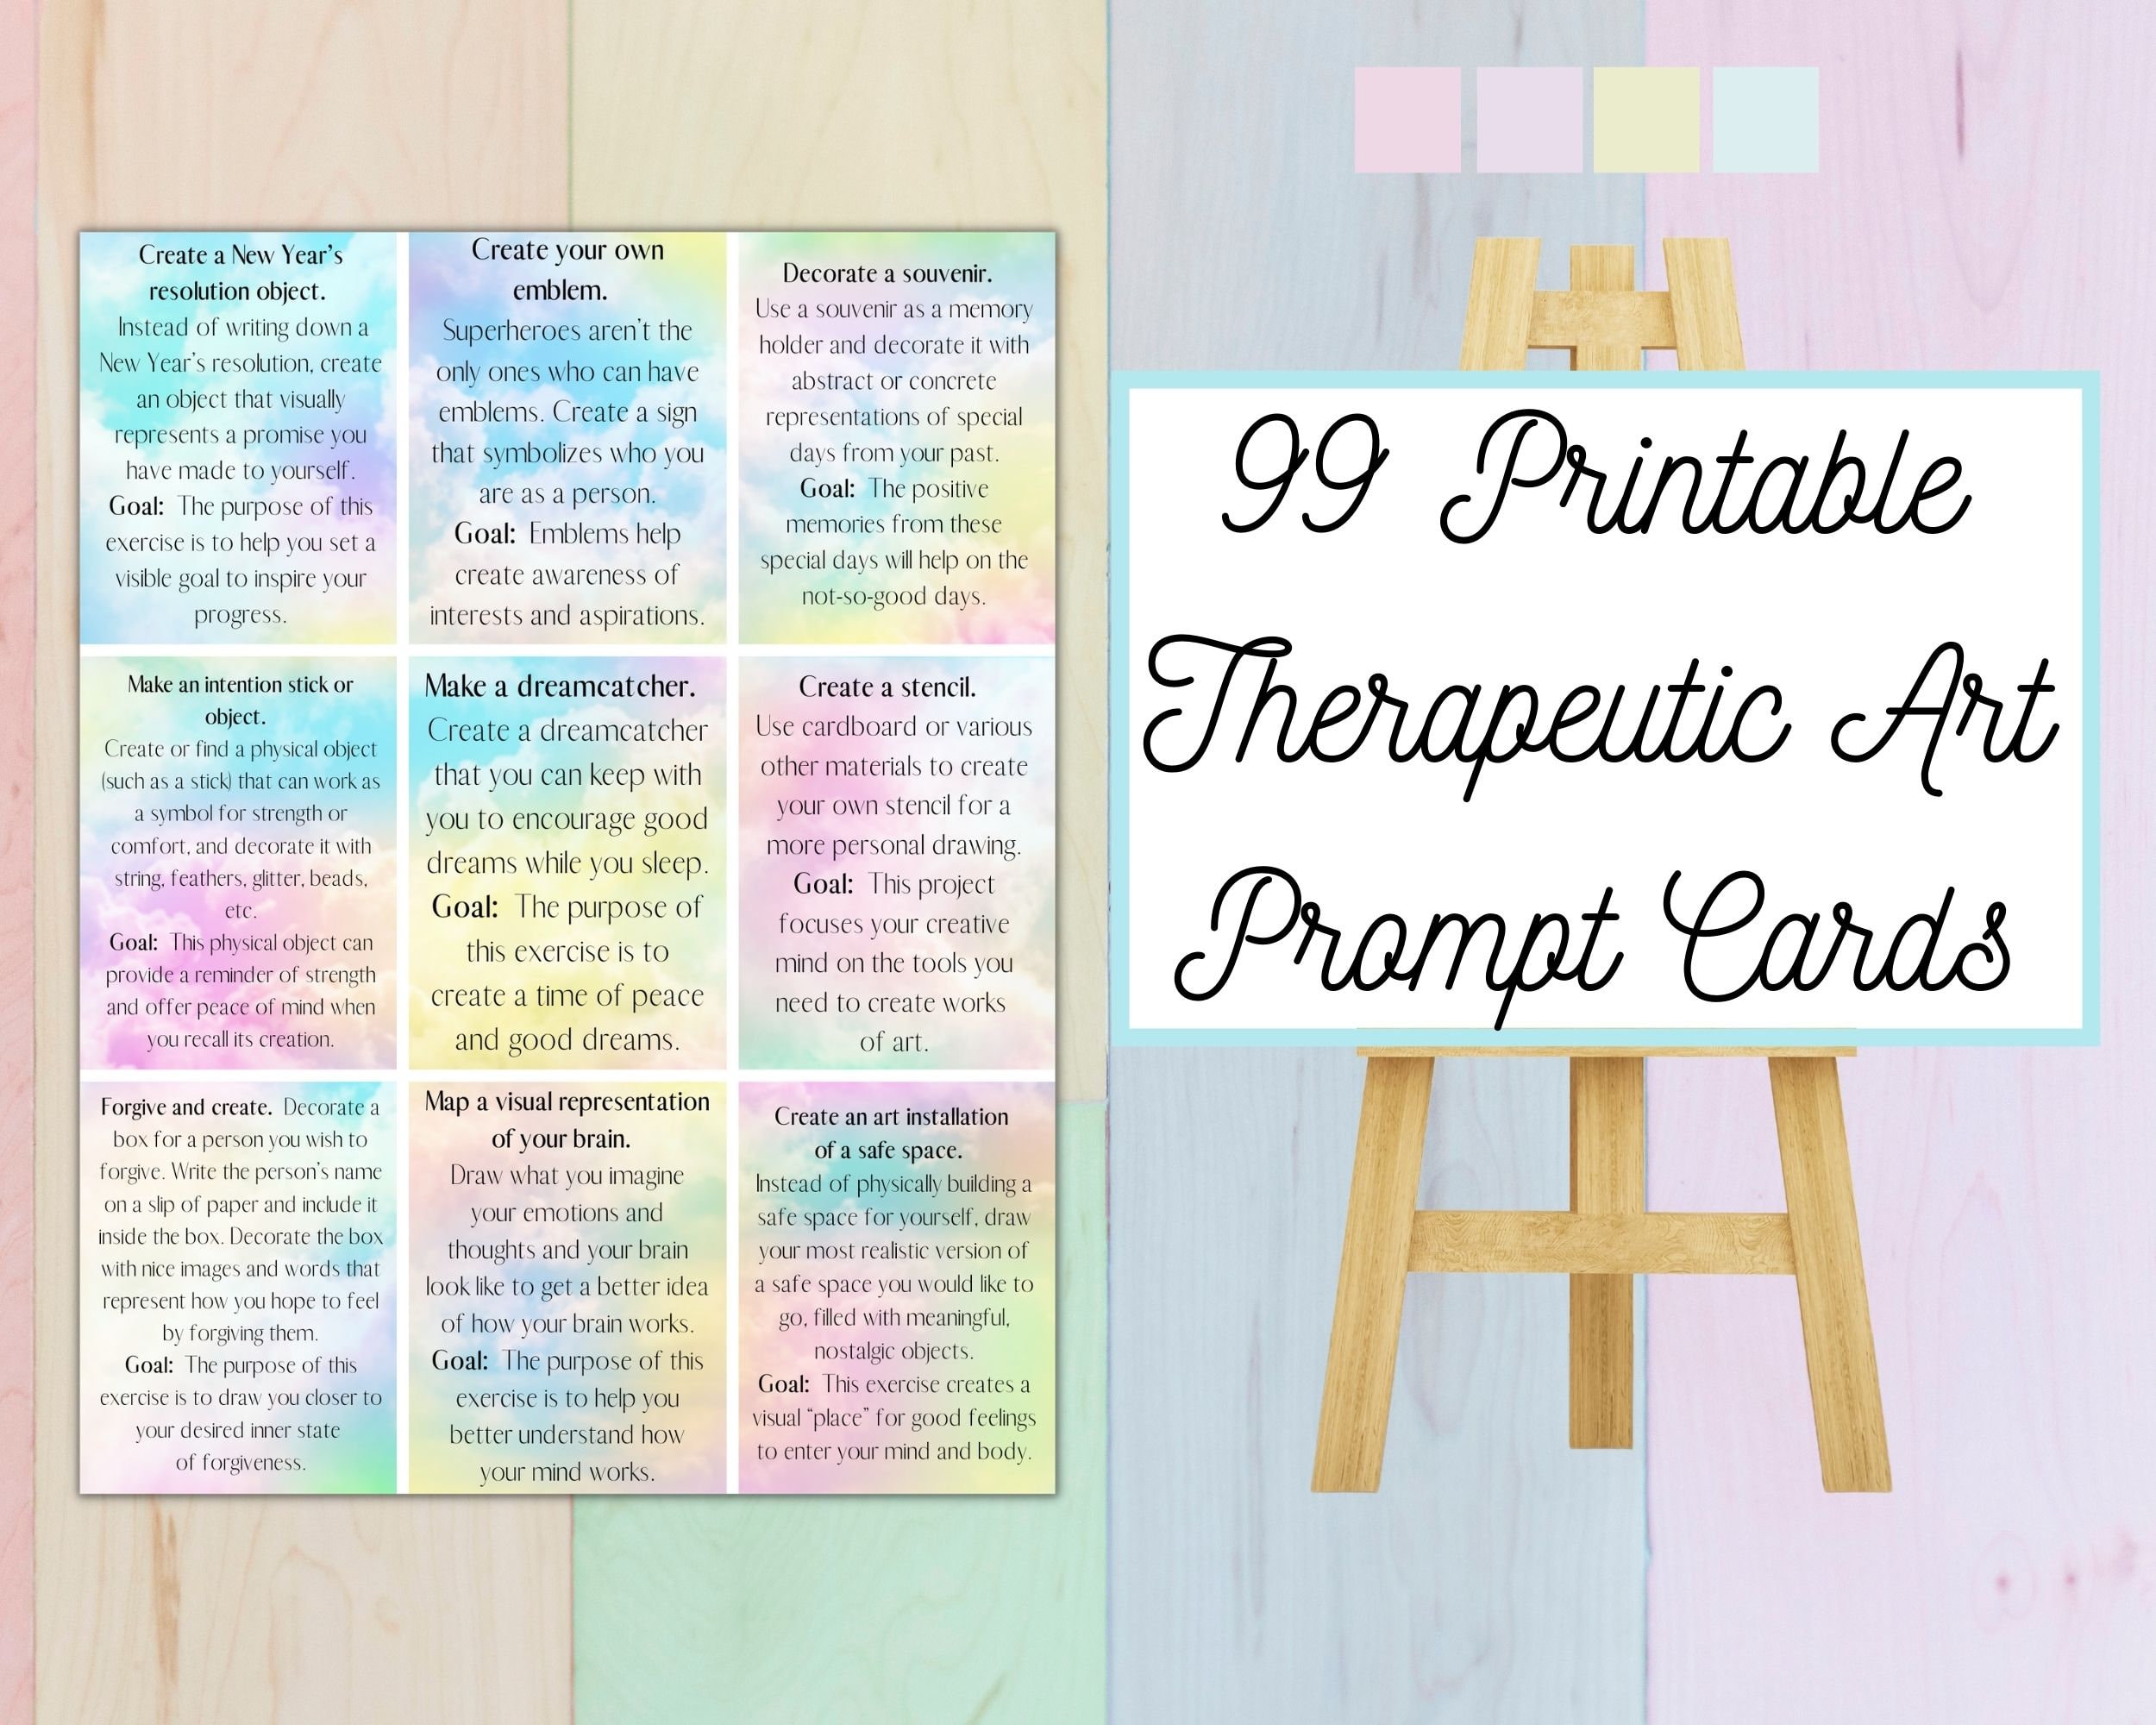 99 Printable Therapeutic Art Prompt Cards Mindfullness Self - Etsy